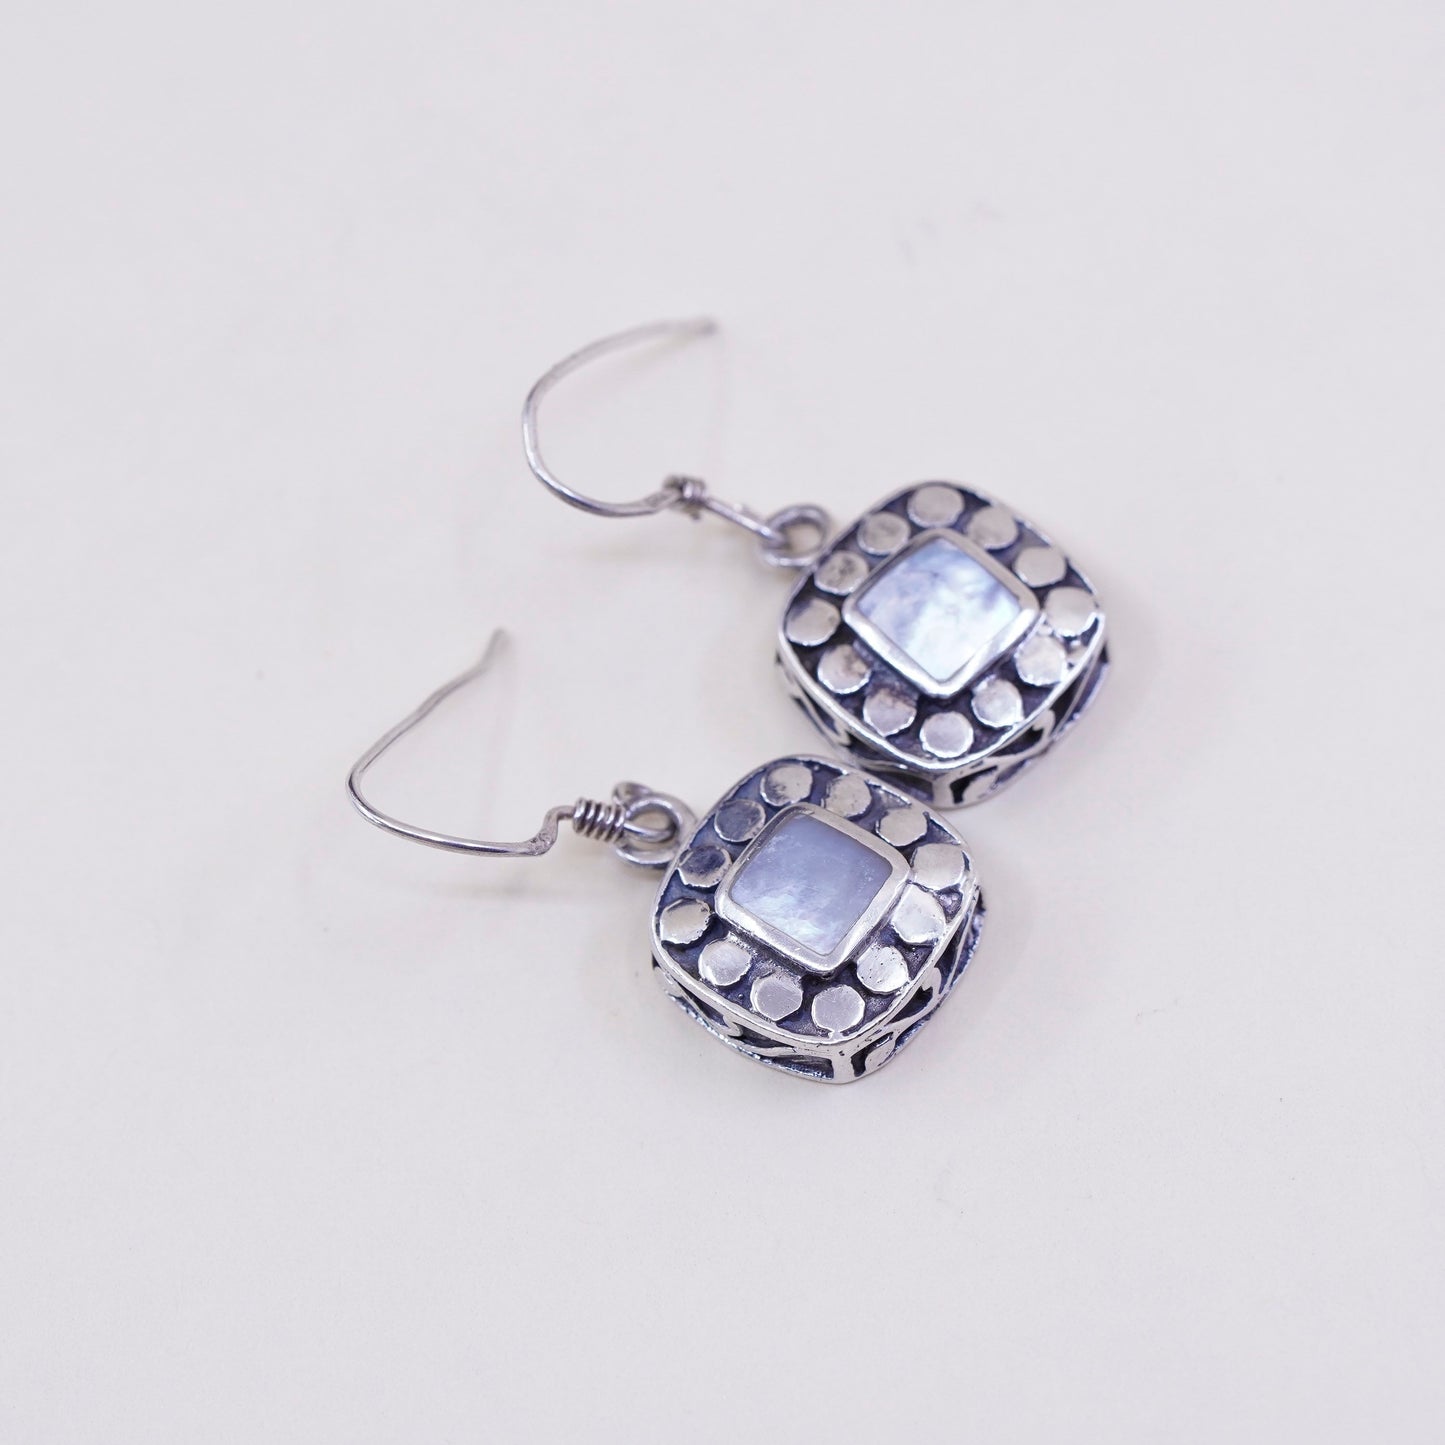 sterling silver handmade earrings, 925 square with mother of pearl and beads